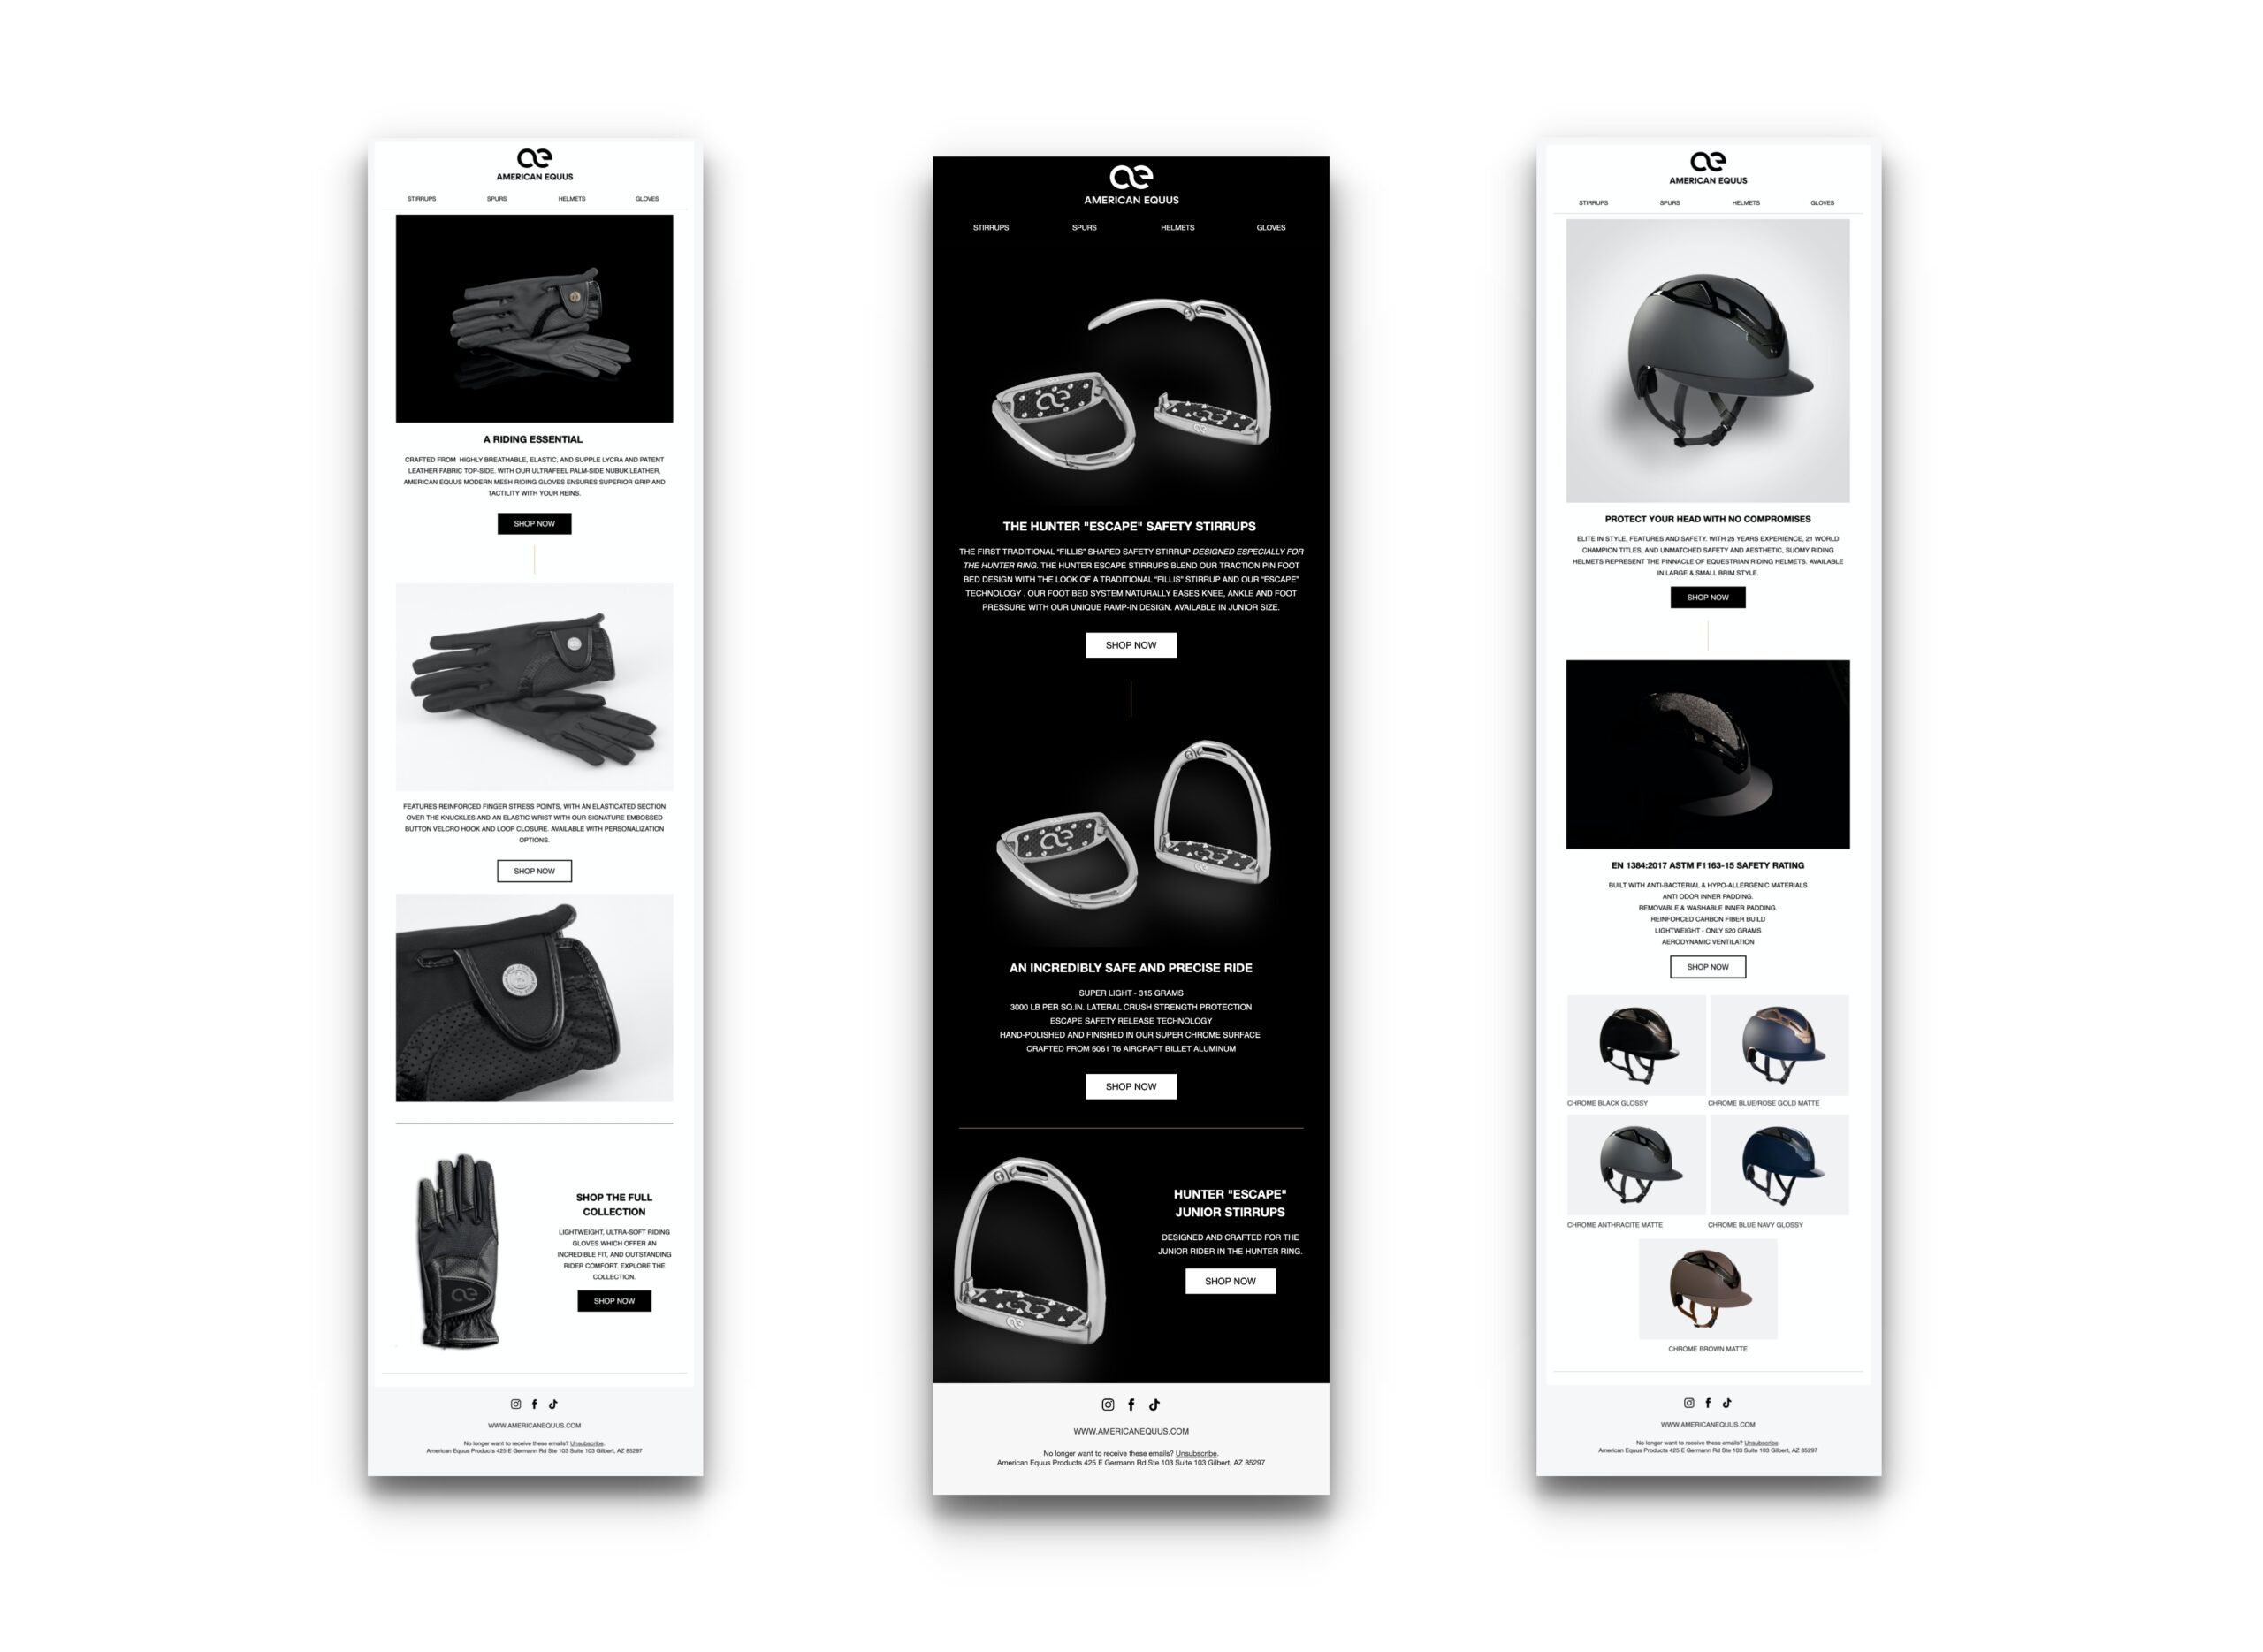 american equus equestrian 2 branding and email campaign design 2